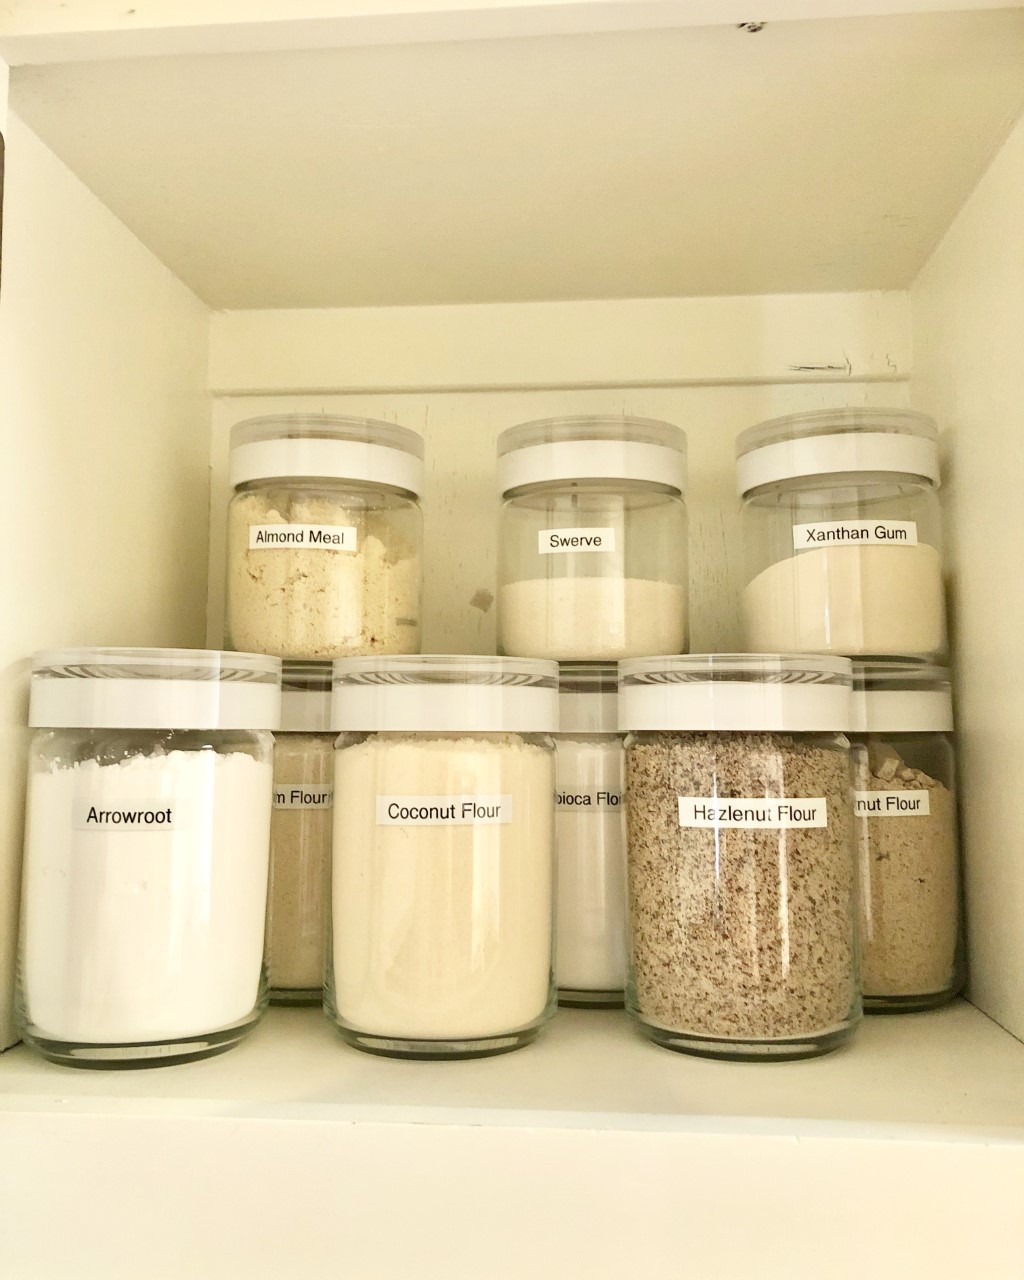 Montrose home organizing services - 16" wide pantry